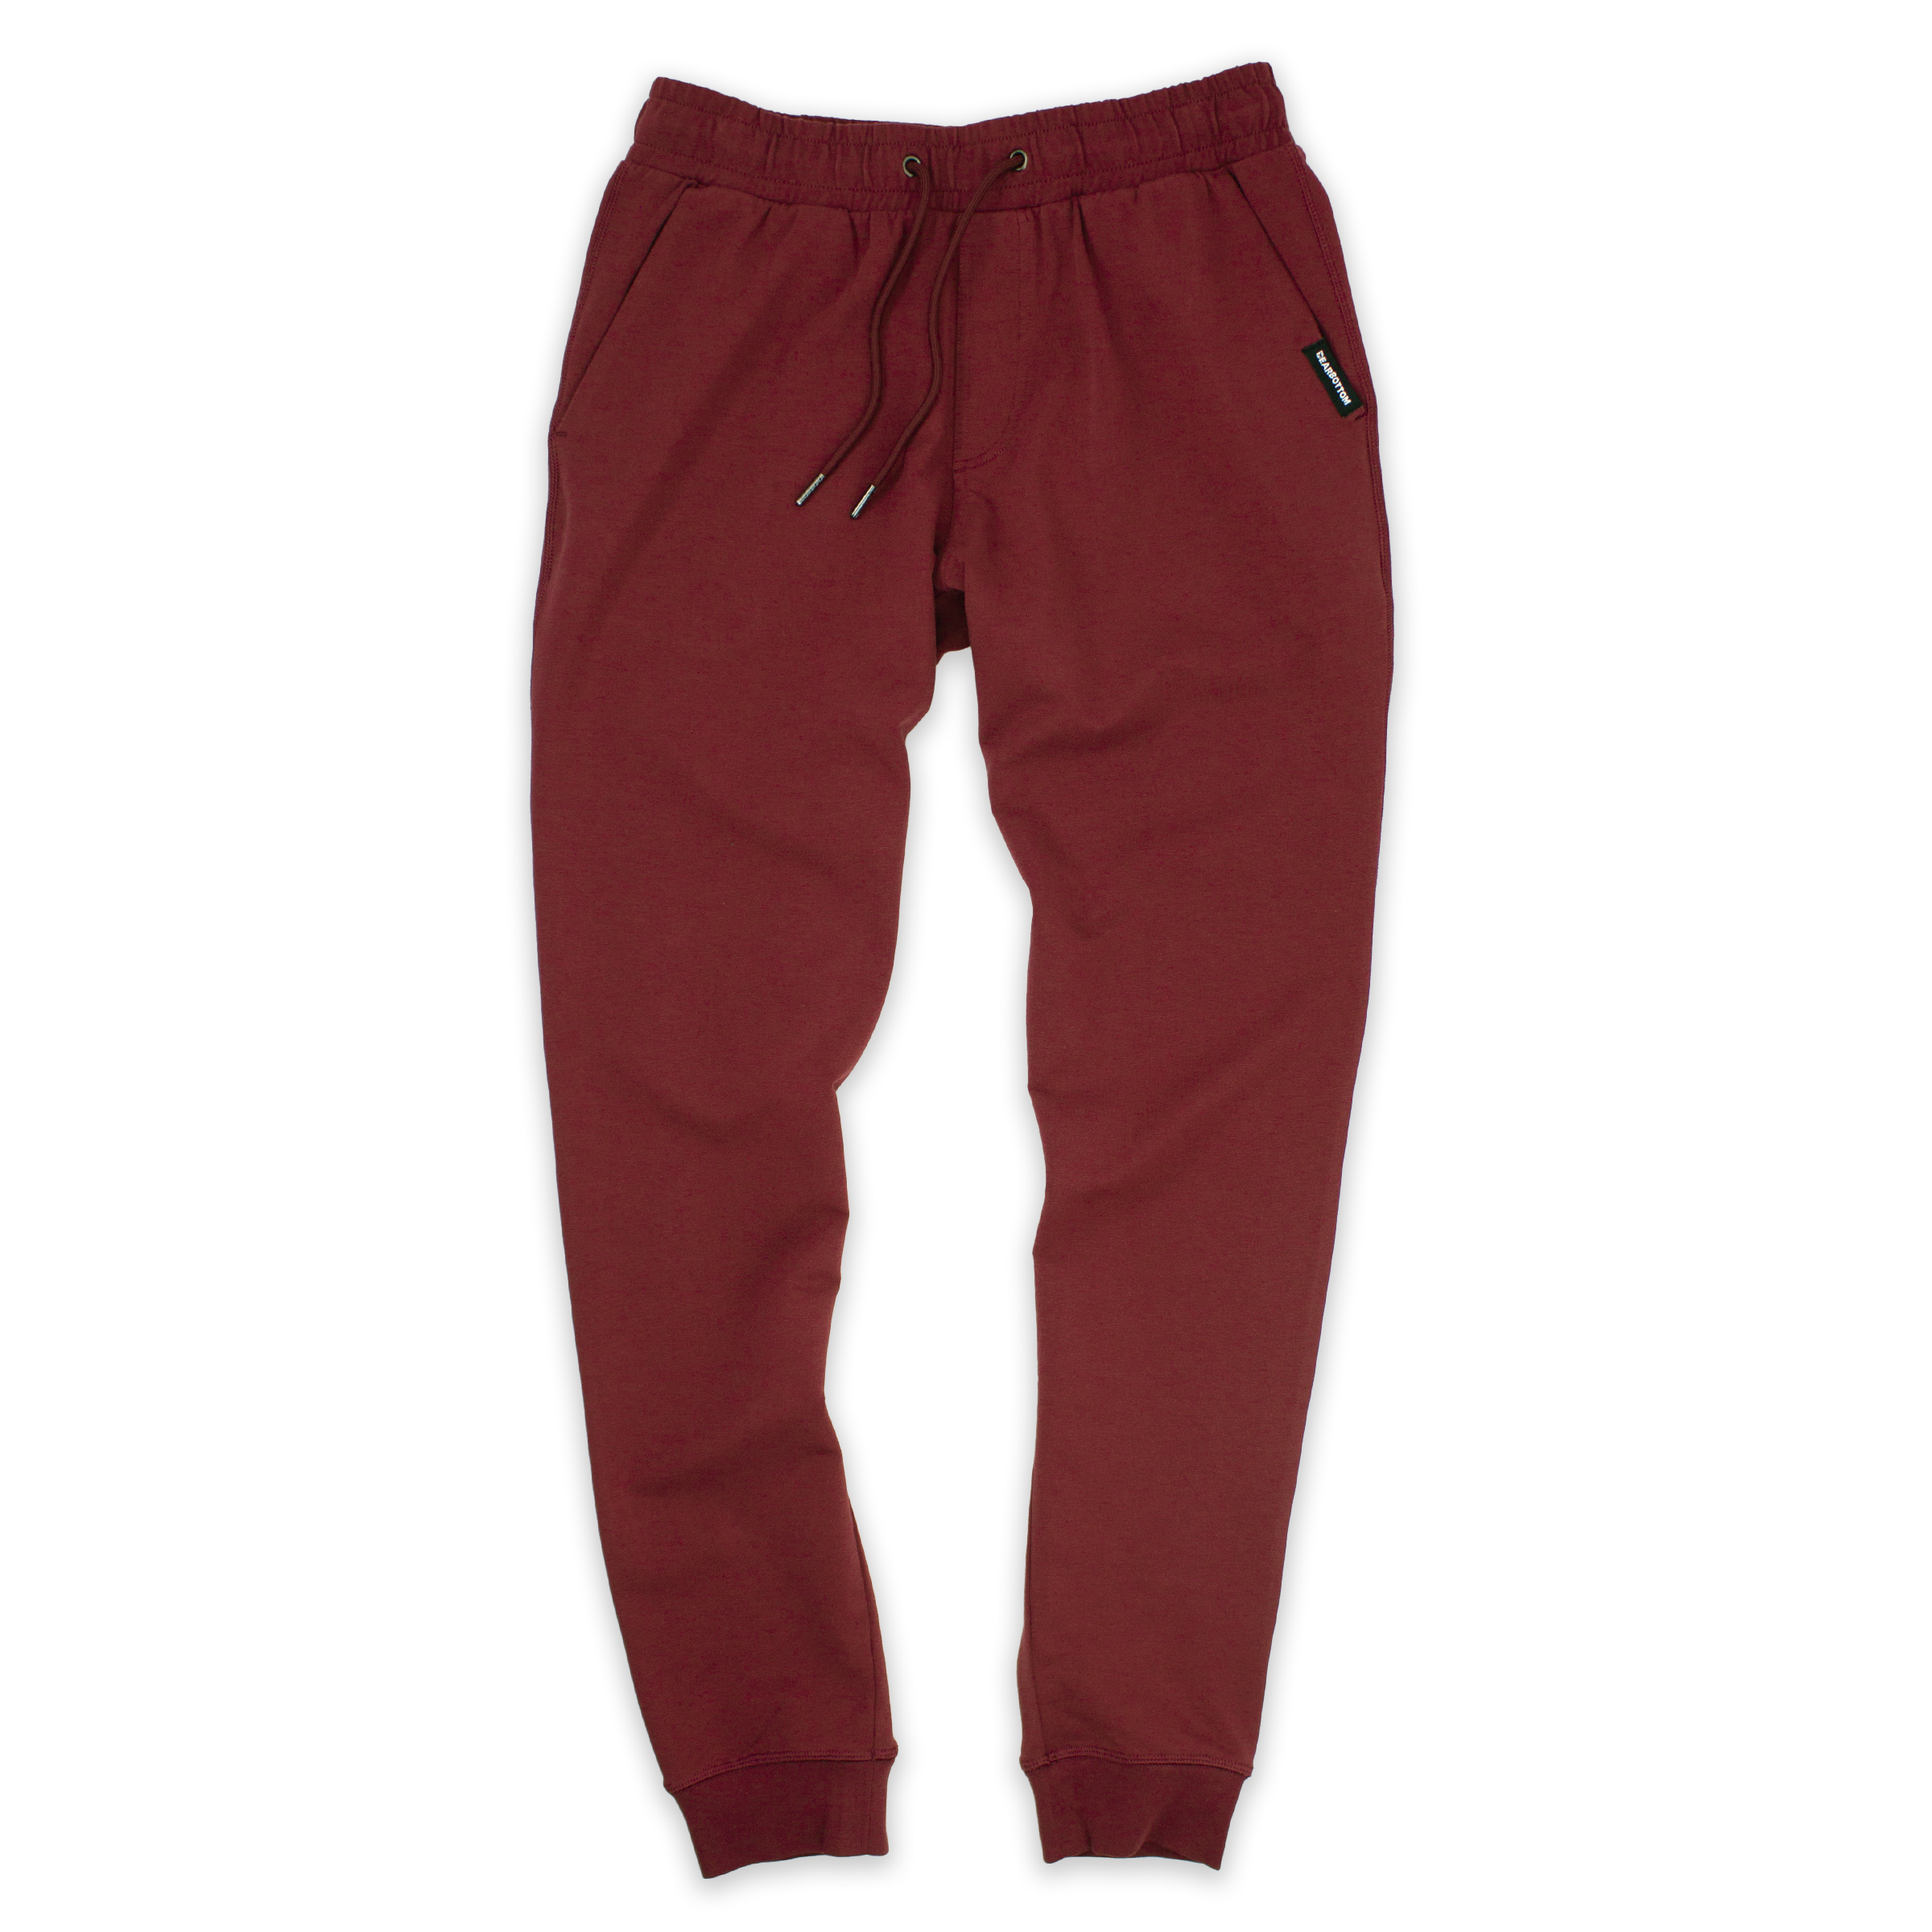 Loft Jogger Maroon with elastic waistband, drawstring with metal tips, two inseam pockets, and ribbed ankle cuffs